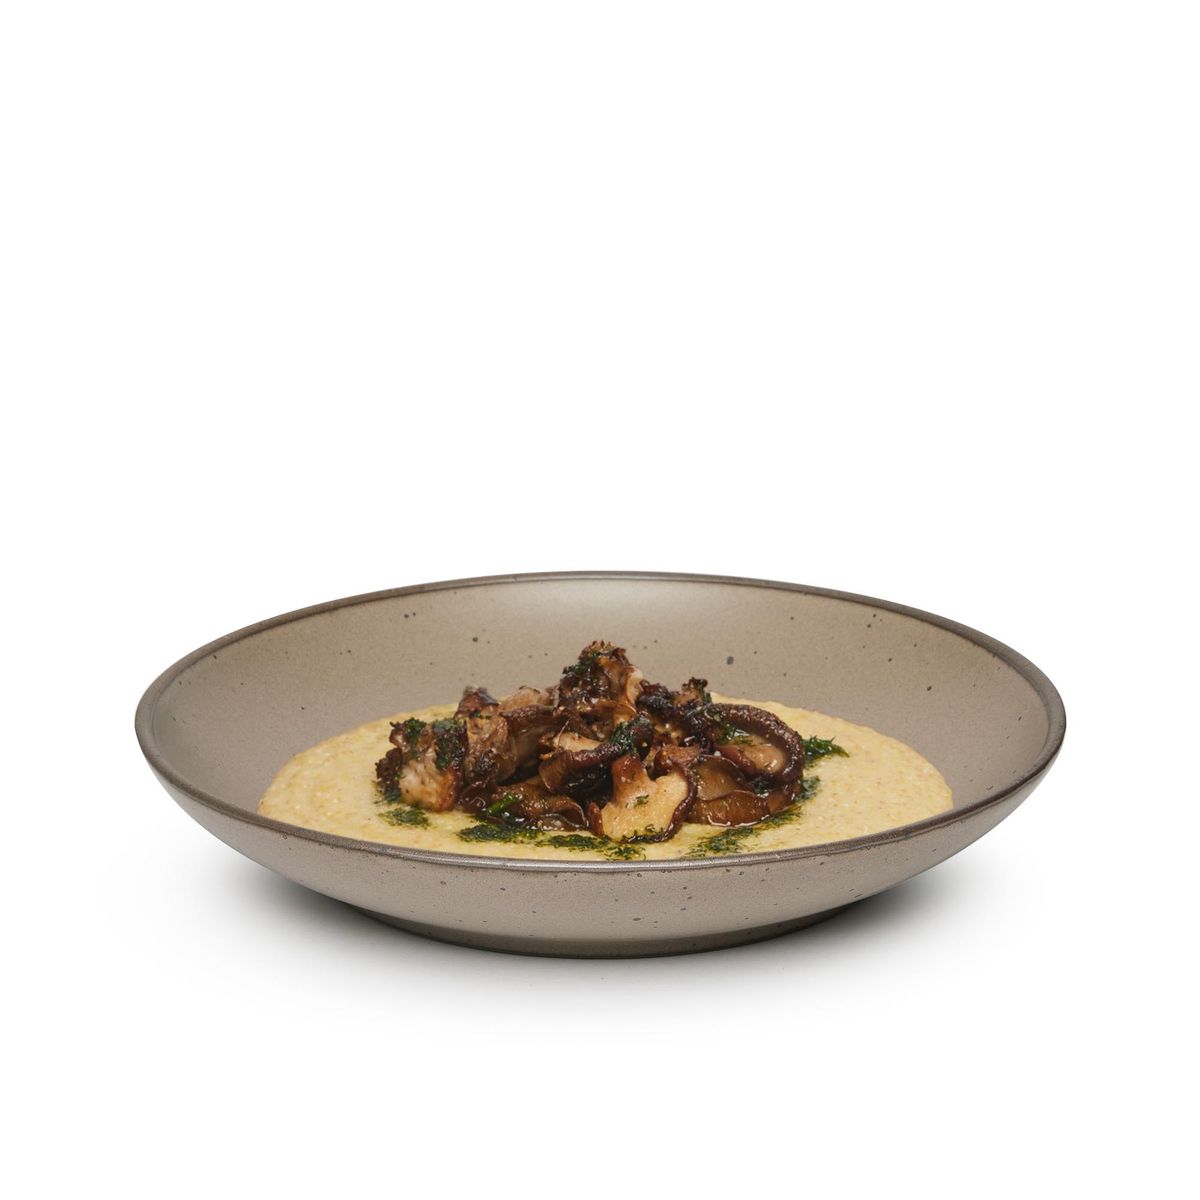 A dinner entrée in a large ceramic plate with a curved bowl edge in a warm pale brown color featuring iron speckles and an unglazed rim.